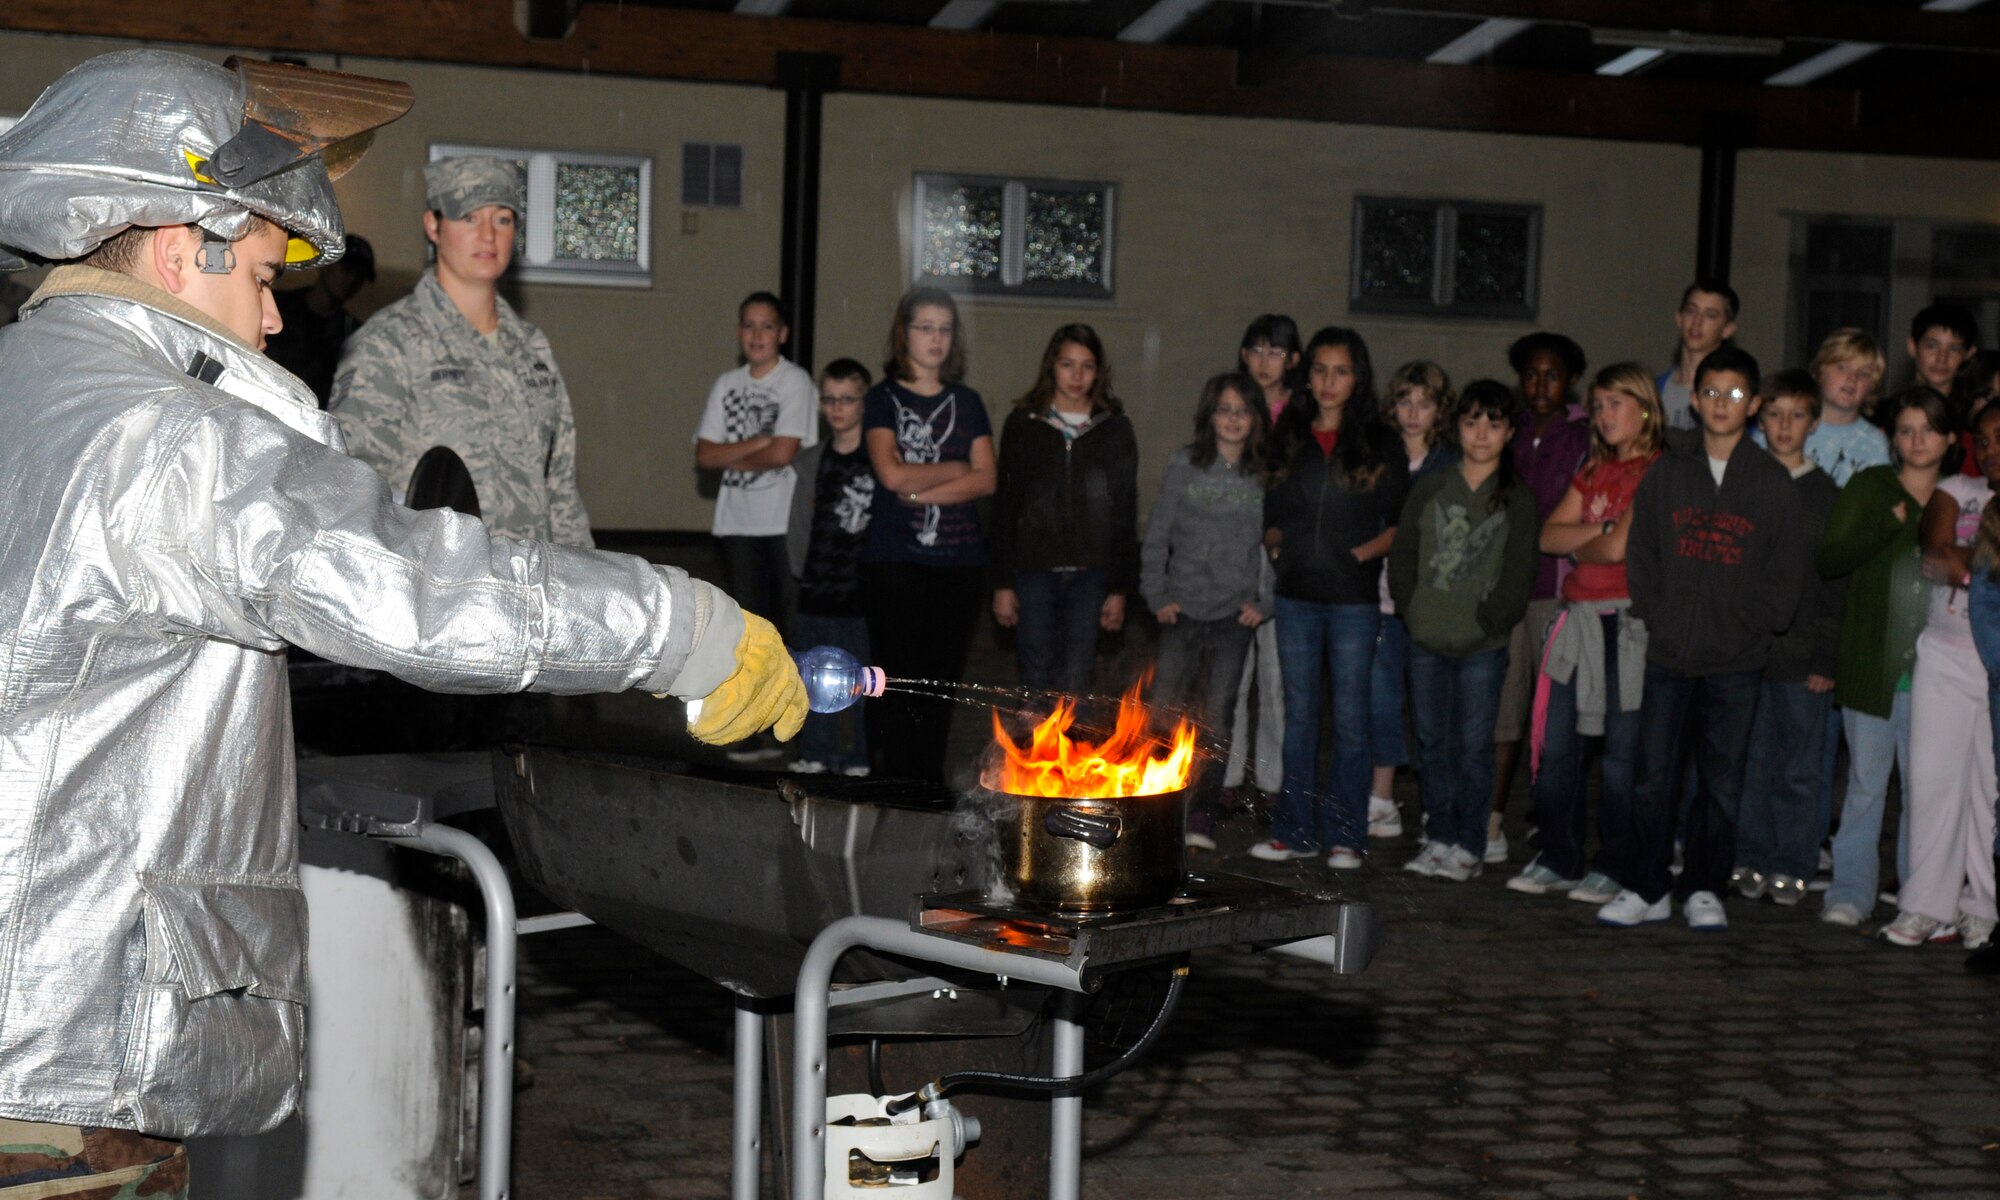 SPANGDAHLEM AIR BASE, Germany – Staff Sgt. Gary Day, 52nd Civil Engineer Squadron fire inspector, demonstrates the negative effect water has on a grease fire to Bitburg Middle School fifth and sixth graders Oct. 8. The fire inspectors then showed the students how to control the fire by covering the pan with a lid. Firefighters visited the middle school as part of Fire Prevention Week Oct. 4-10. (U.S. Air Force photo/Airman 1st Class Staci Miller)